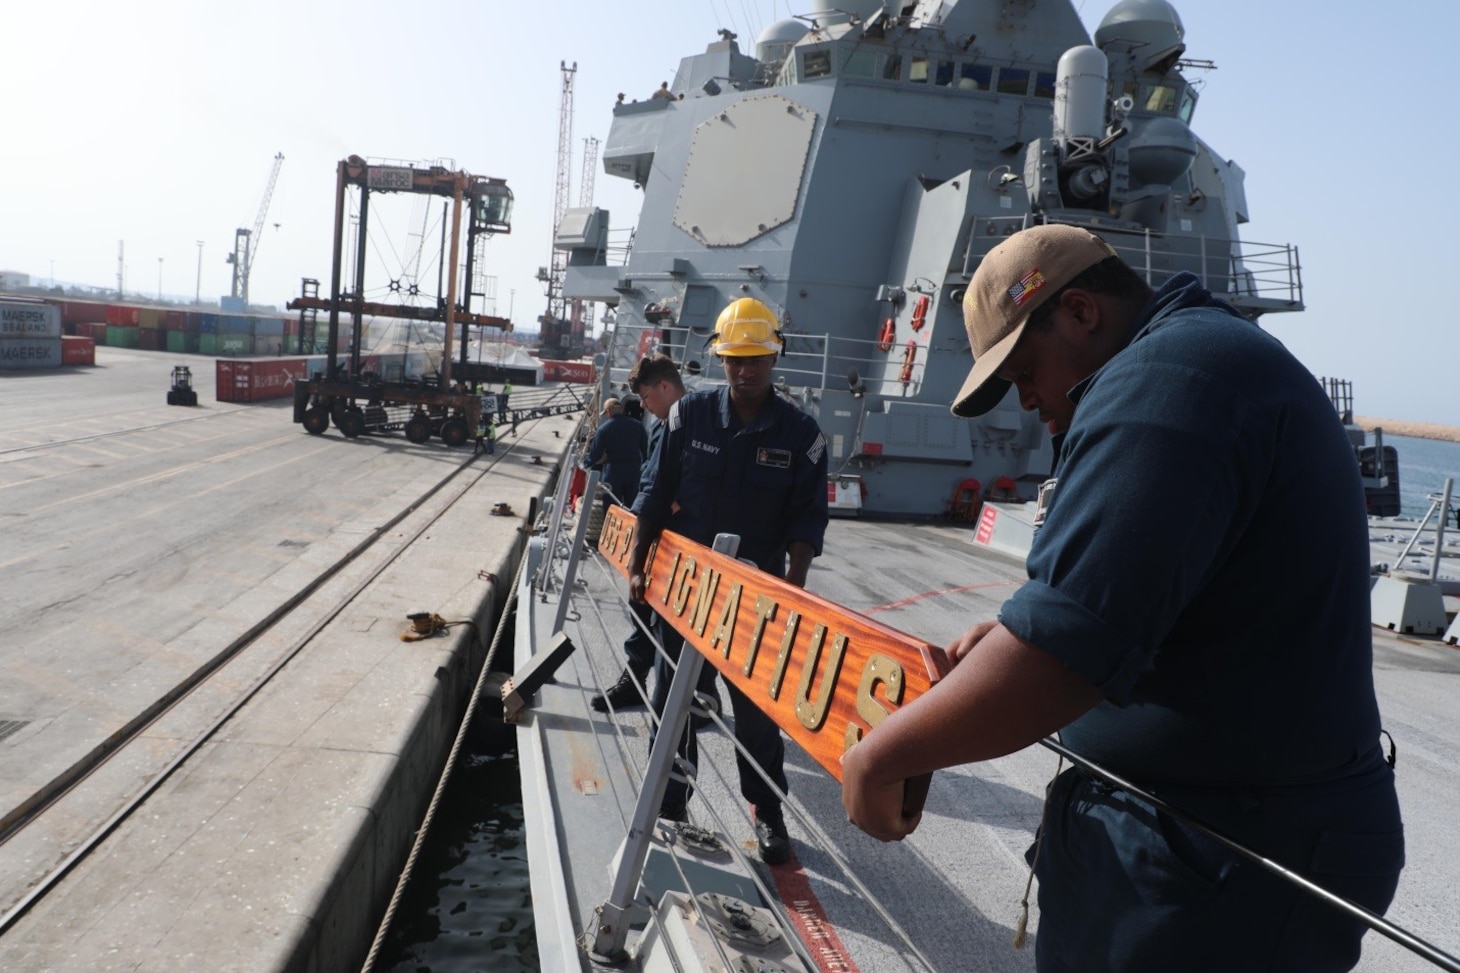 Sailors assigned to the Arleigh Burke-class guided-missile destroyer USS Paul Ignatius (DDG 117), hang the ship’s sign after pulling into Morocco, Aug. 25, 2023. Paul Ignatius is on a scheduled deployment in the U.S. Naval Forces Europe area of operations, employed by the U.S. Sixth Fleet to defend U.S., allied and partner interests. (U.S. Navy photo by Mass Communication Specialist 1st Class Zac Shea)